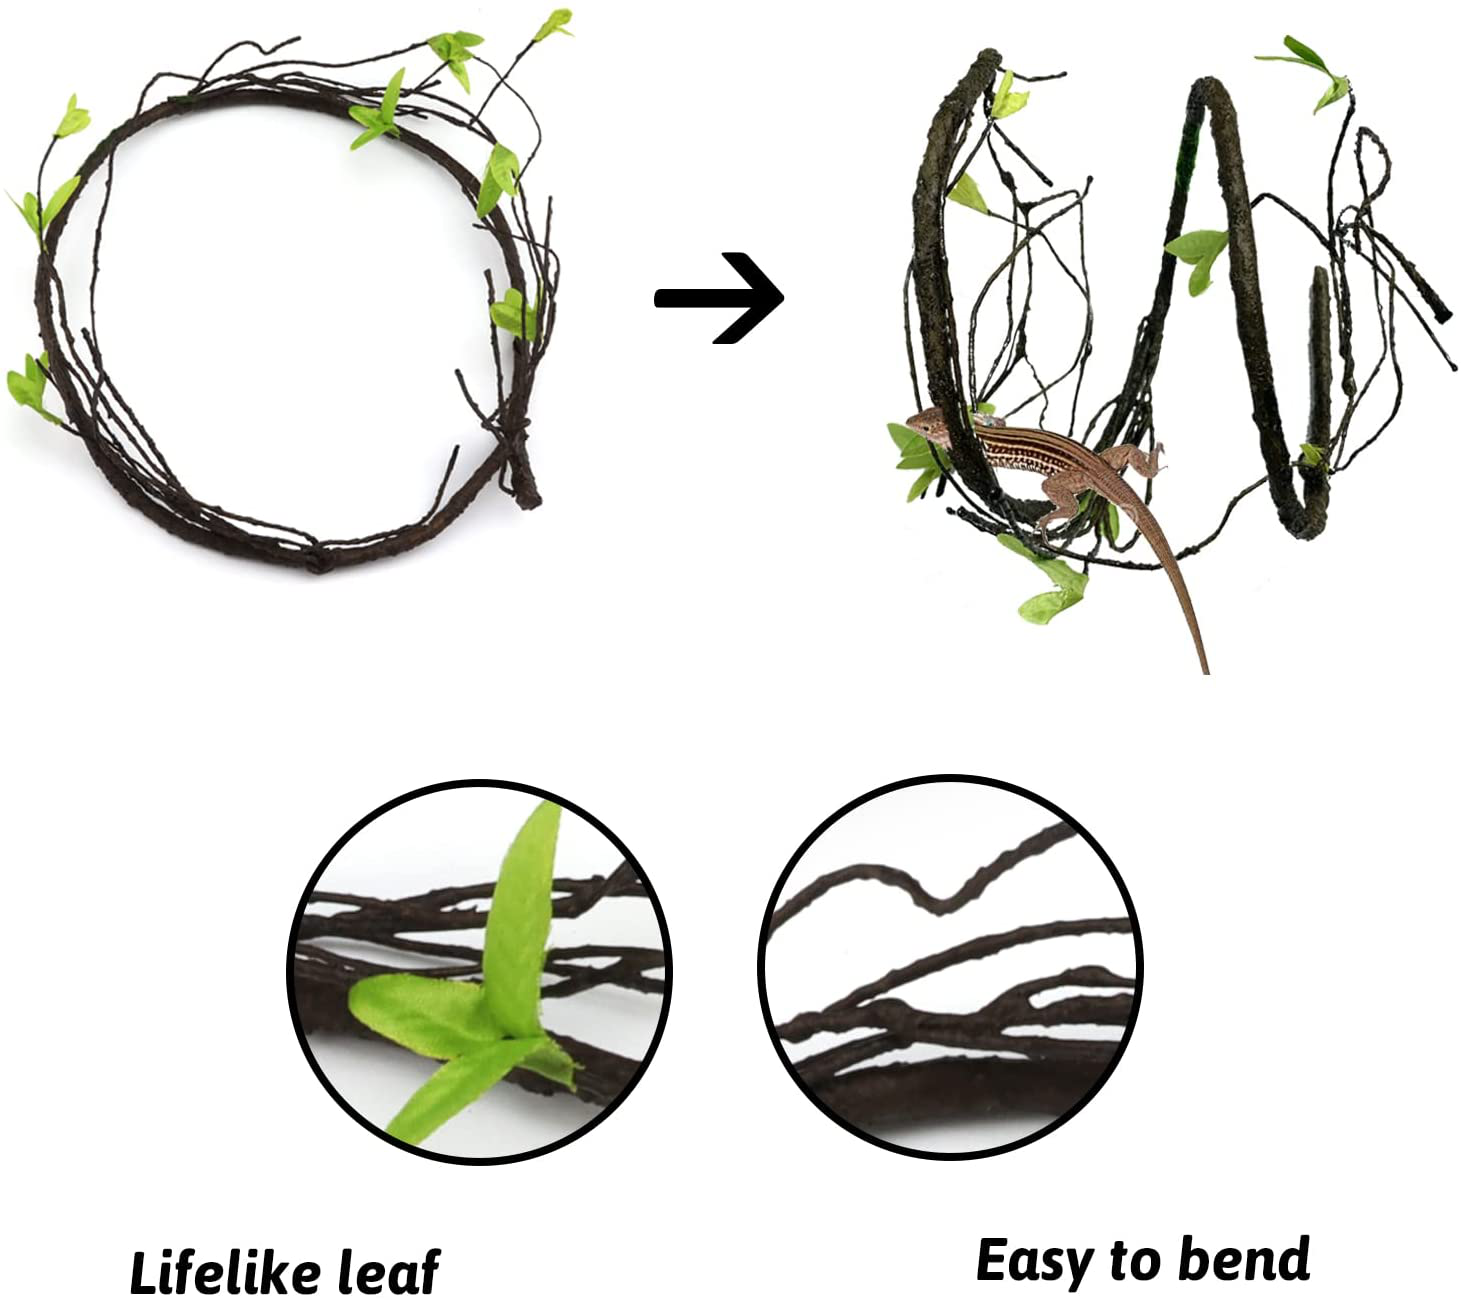 Pietypet Reptile Lizard Habitat Decor Accessories, Bearded Dragon Hammock, Reptile Hammock with Artificial Climbing Vines and Plants for Chameleon, Lizards, Gecko, Snakes, Lguana Animals & Pet Supplies > Pet Supplies > Reptile & Amphibian Supplies > Reptile & Amphibian Habitats PietyPet   